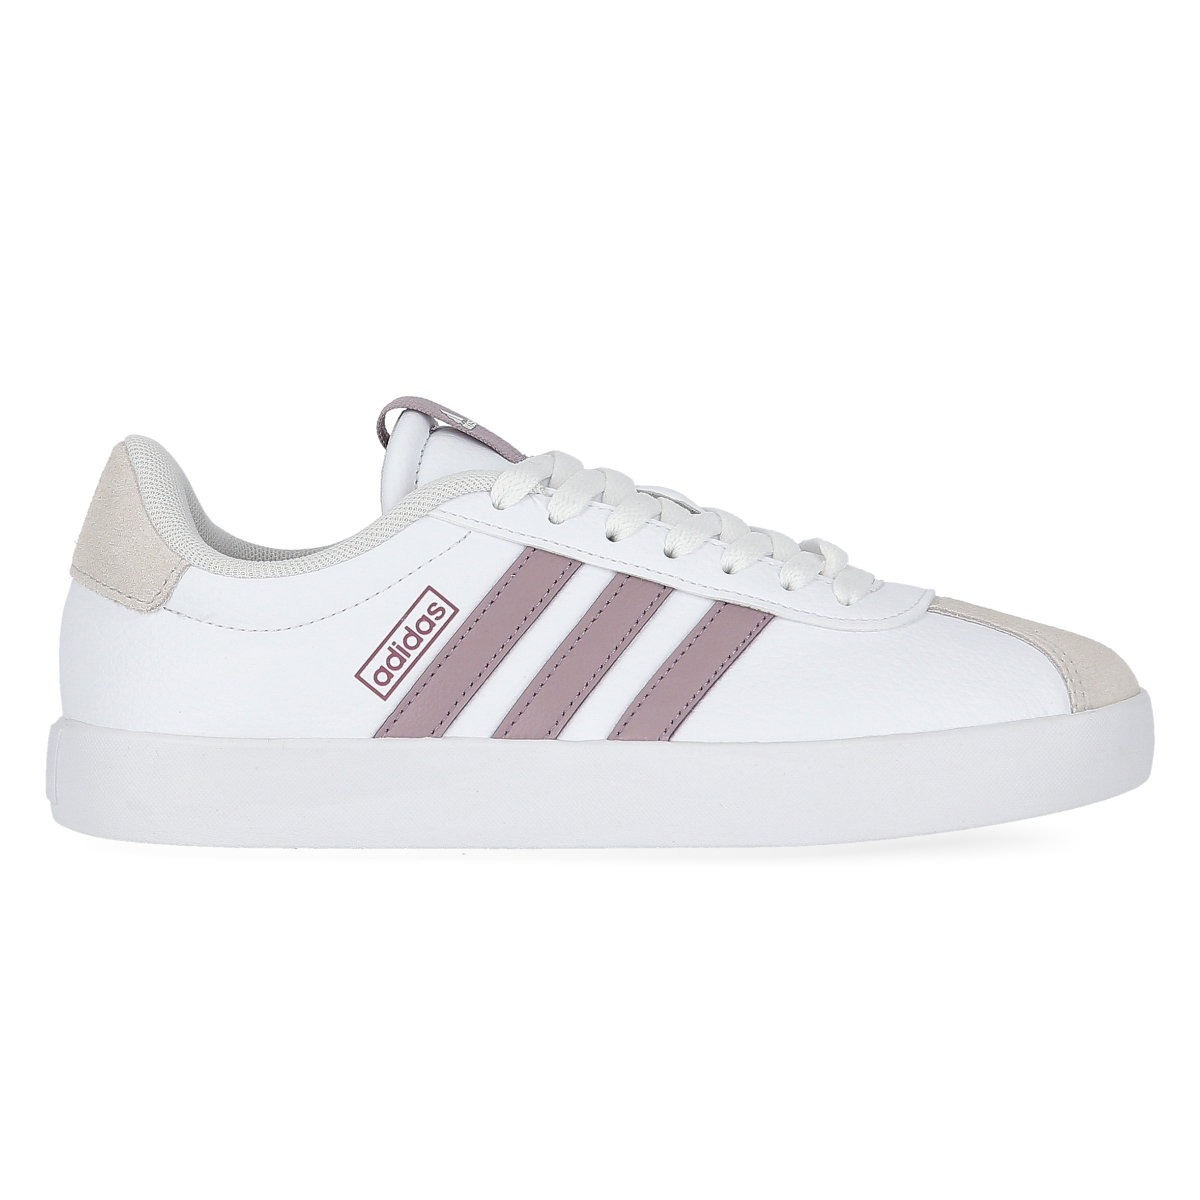 Zapatillas adidas Vl Court 3.0 Mujer,  image number null